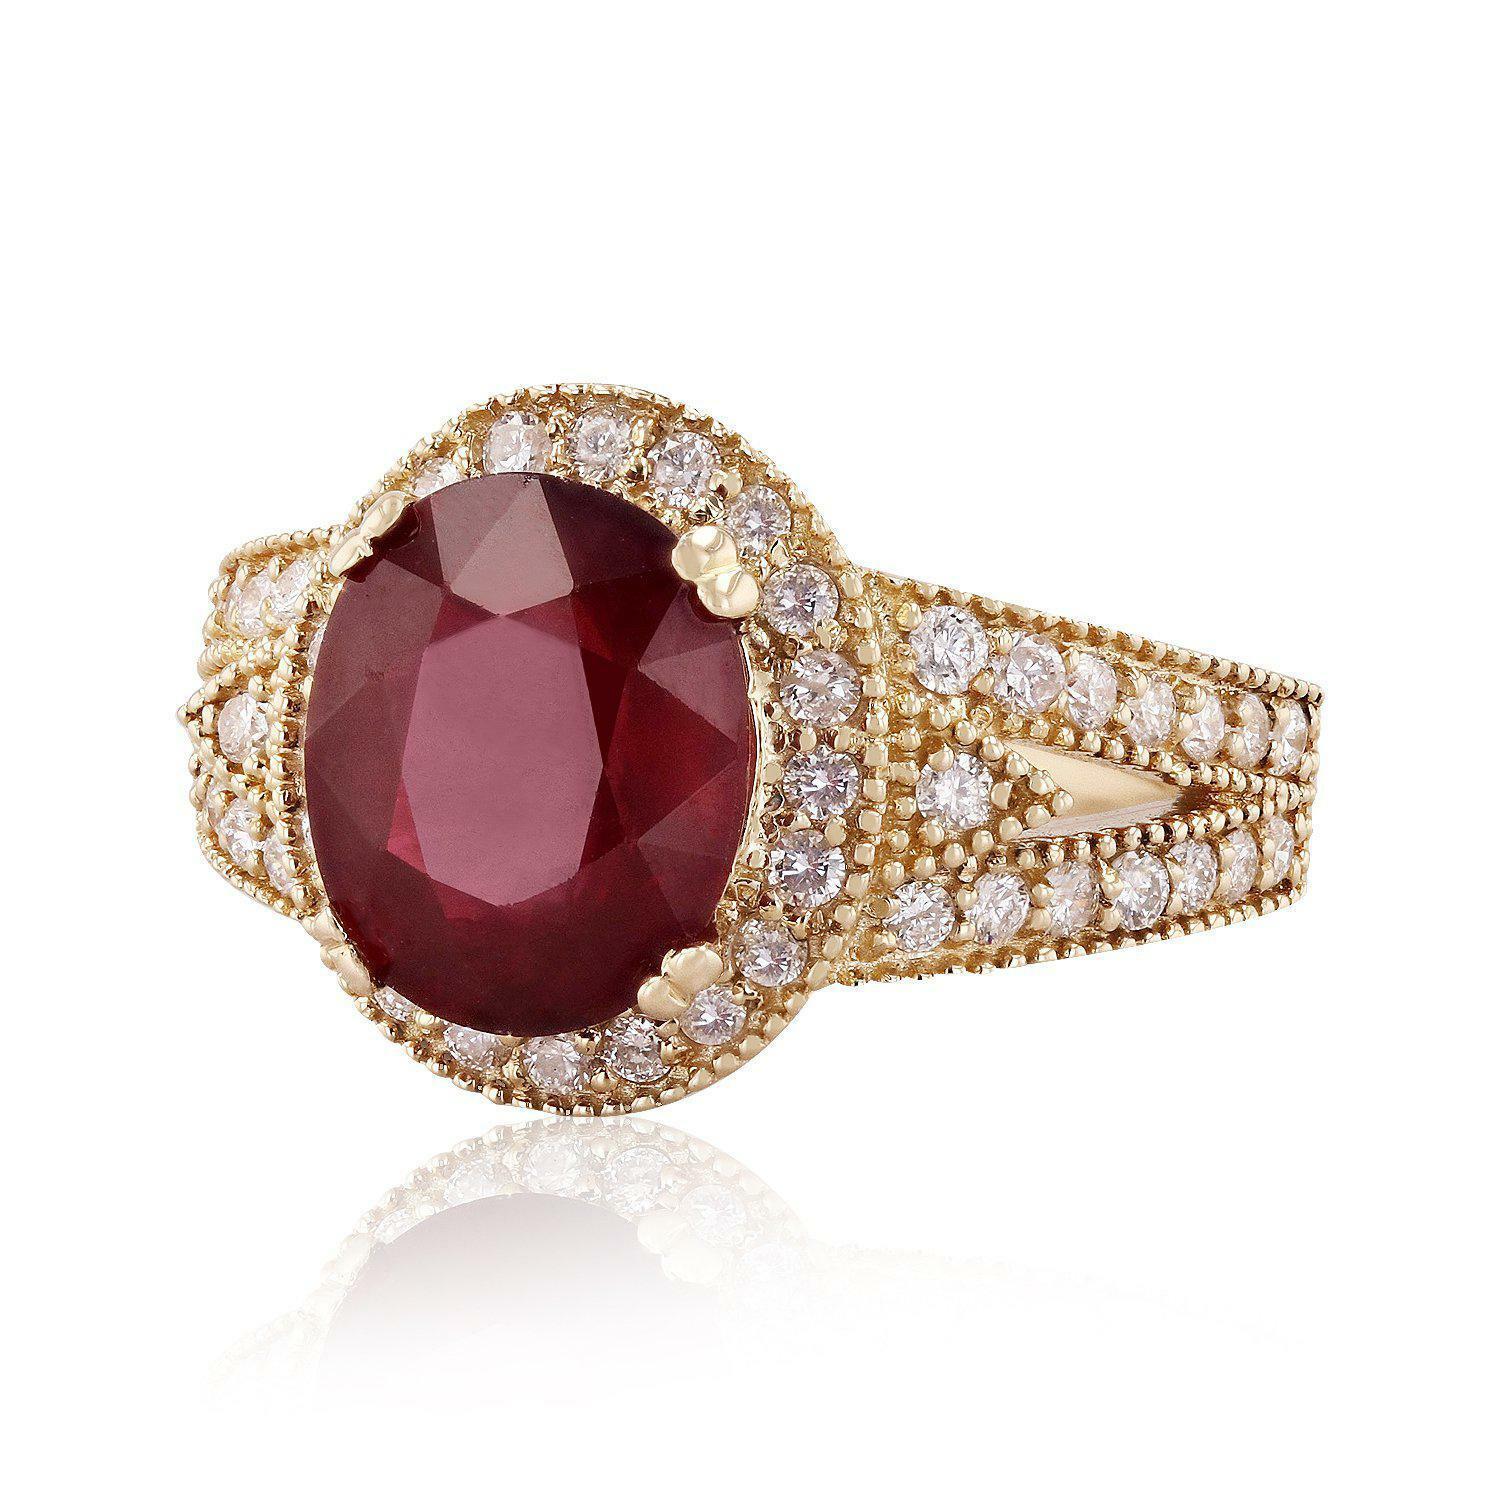 6.70 Carats Impressive Red Ruby and Natural Diamond 14K Yellow Gold Ring

Total Red Ruby Weight is Approx. 5.50 Carats

Ruby Treatment: Lead Glass Filling

Ruby Measures: Approx. 11.00 x 9.00mm

Natural Round Diamonds Weight: Approx. 1.20 Carats